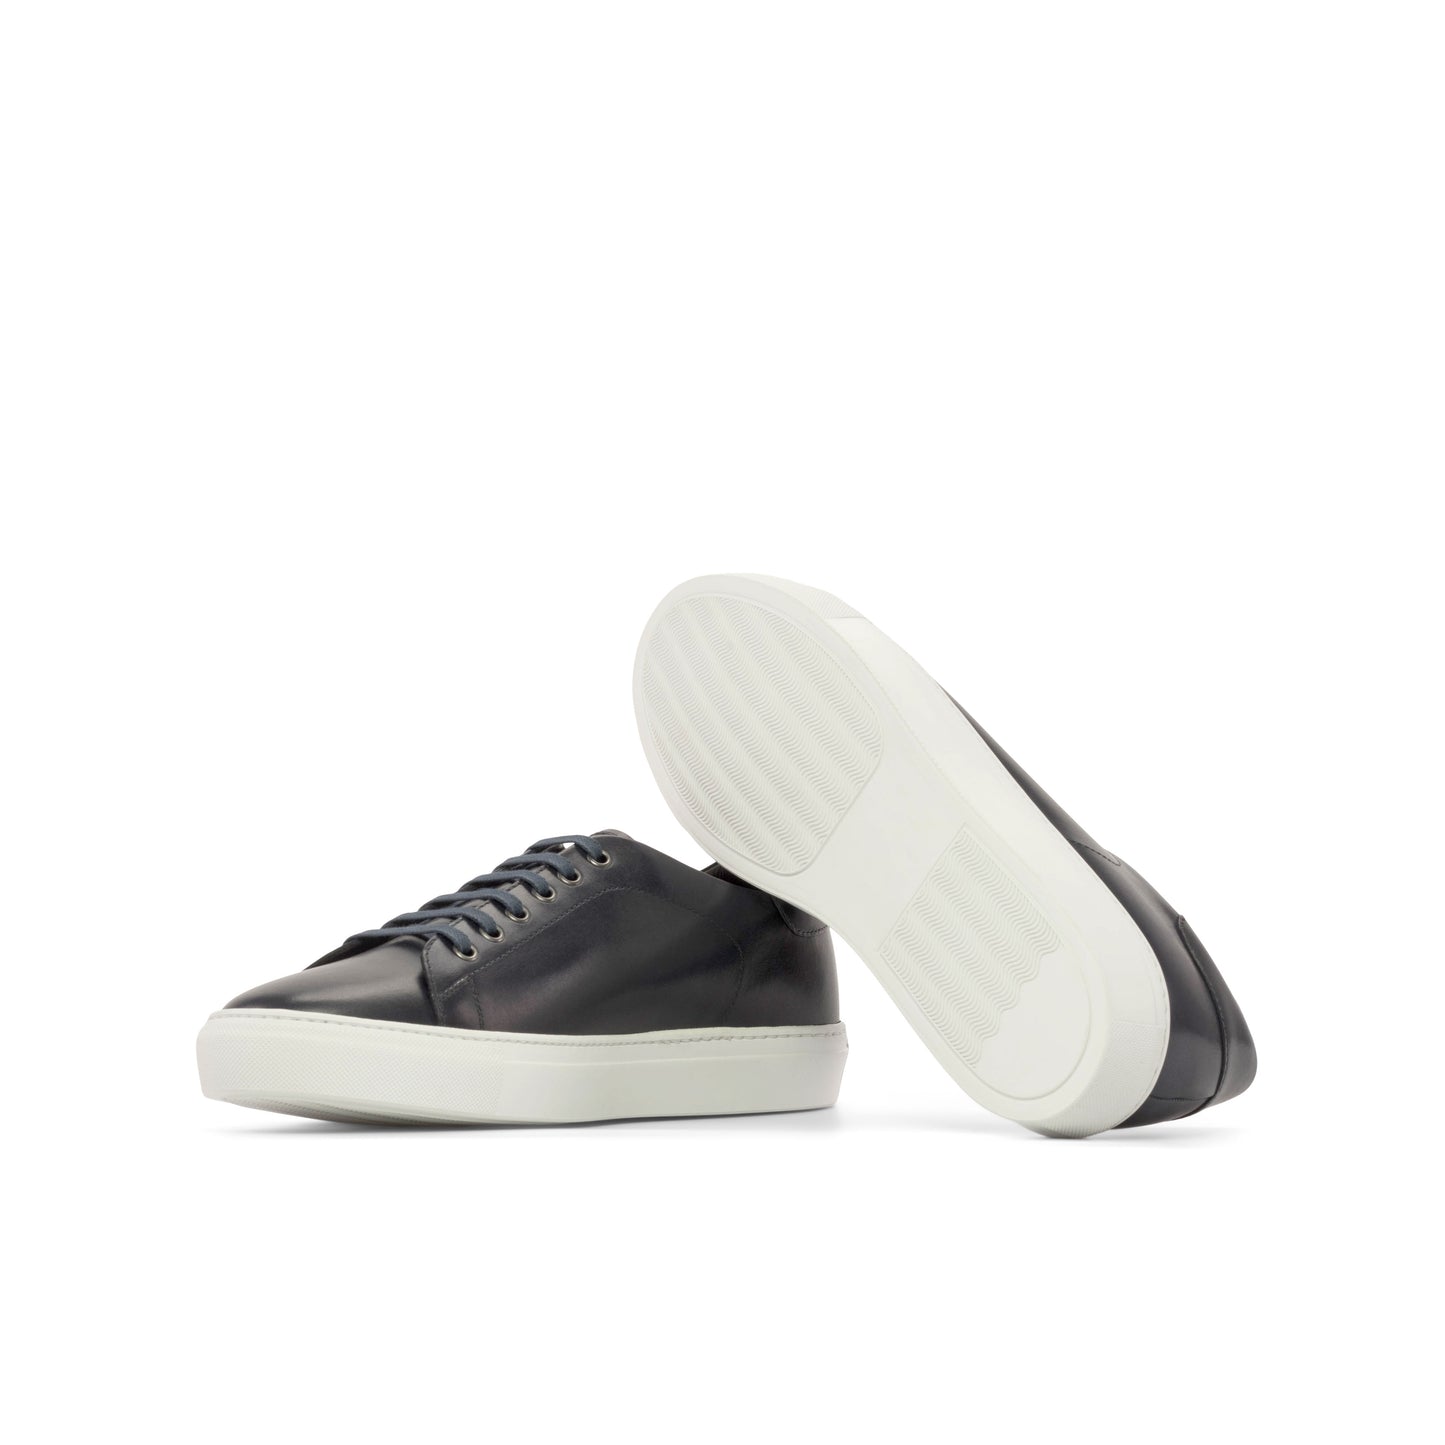 Sneakers navy white rubber sole